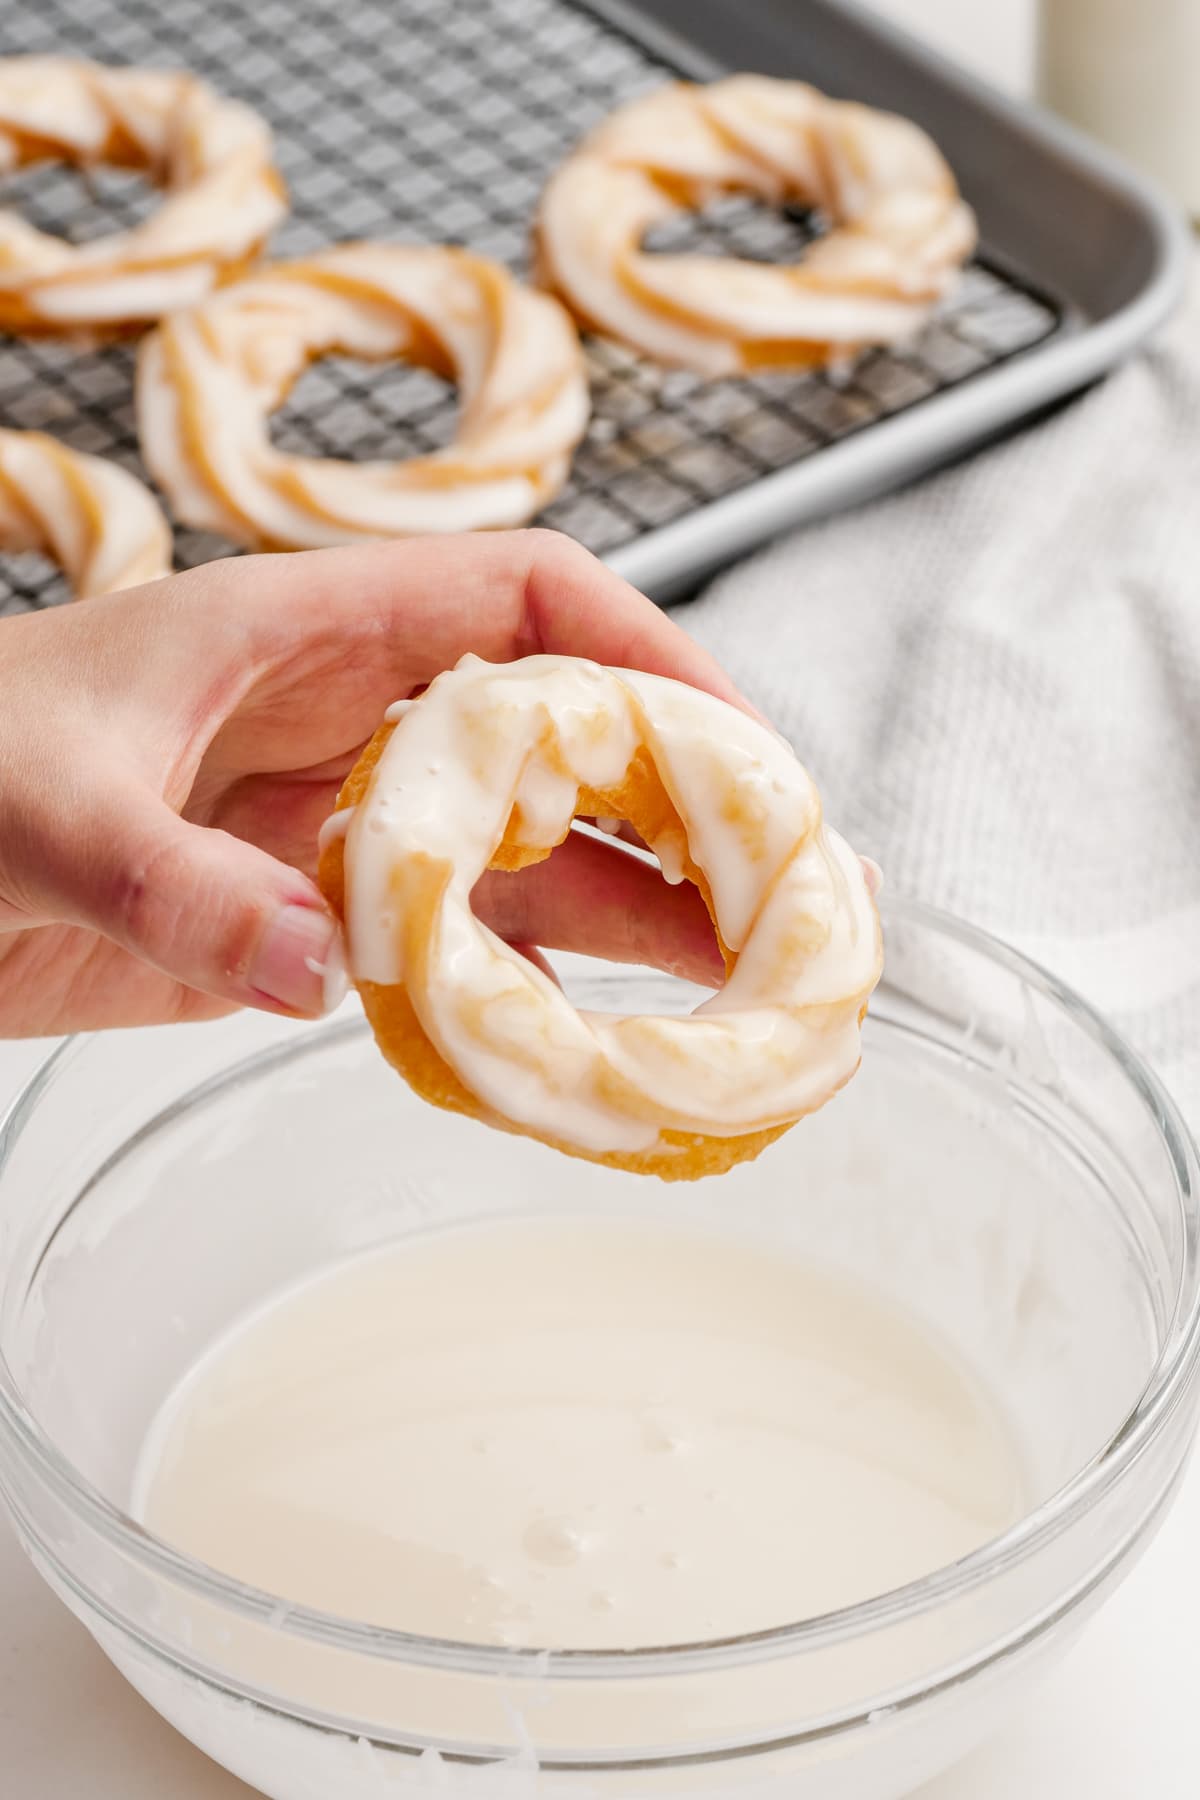 woman's hand dipping french crullers in glaze